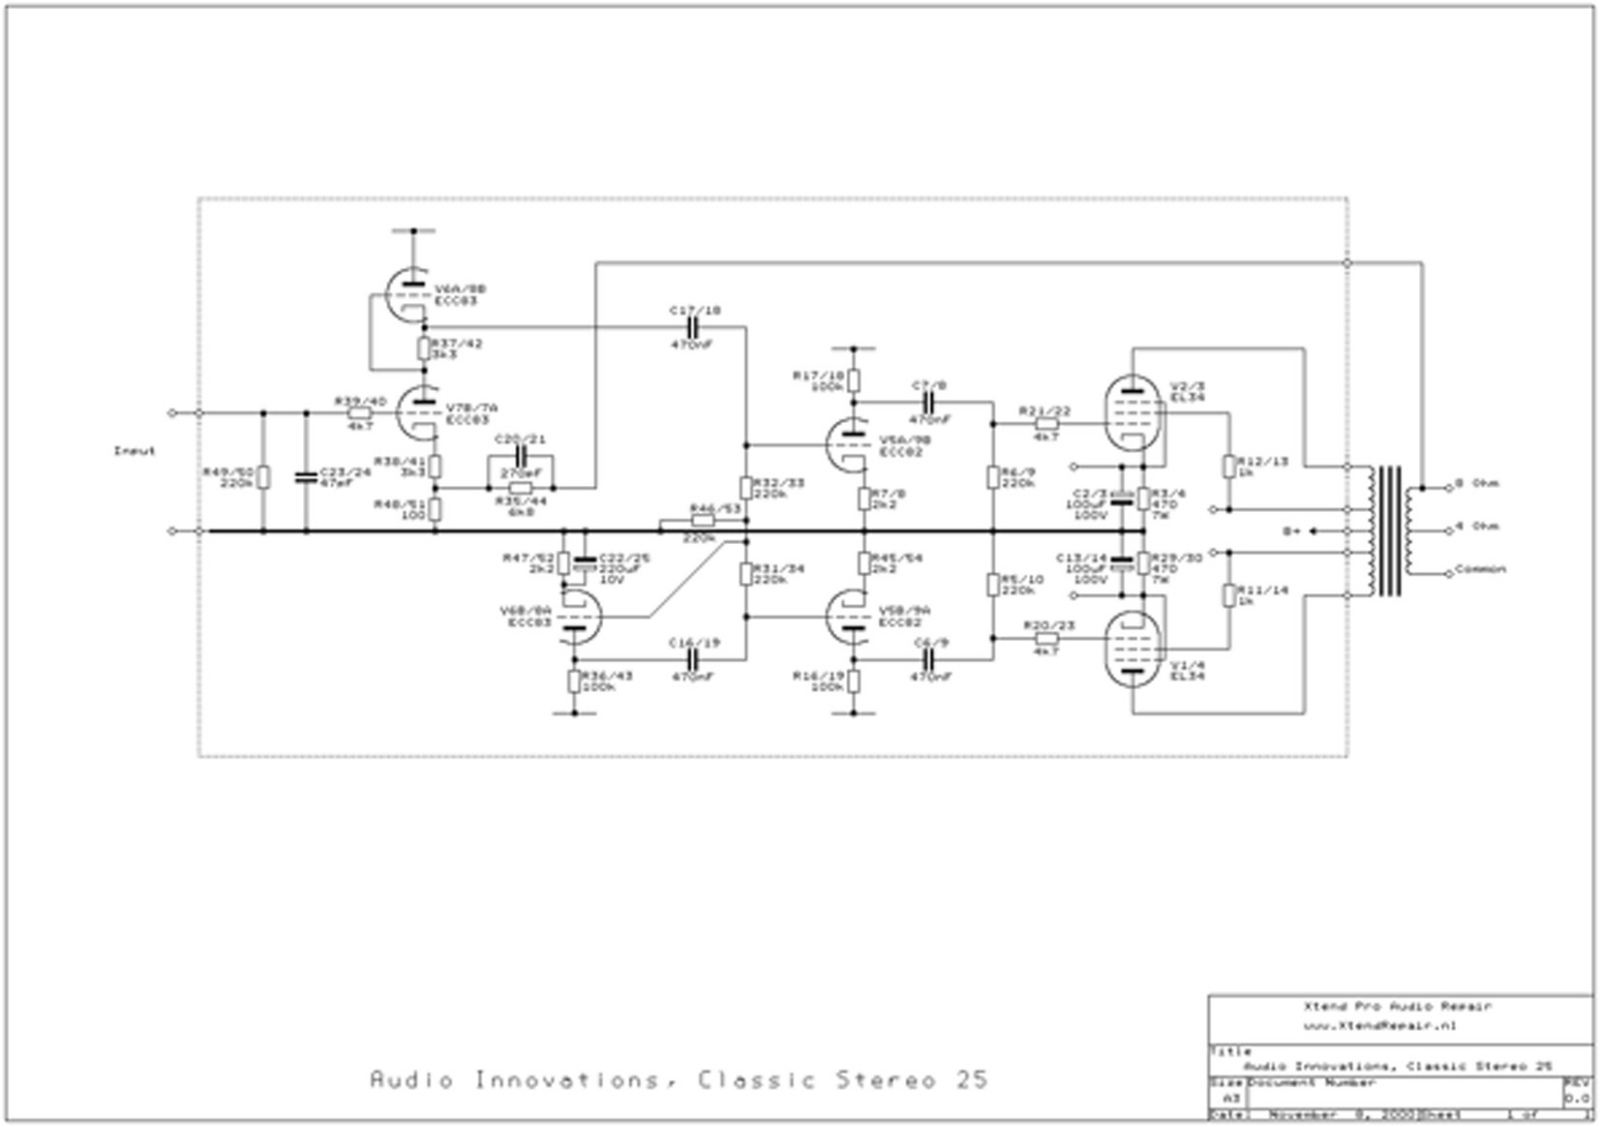 Audio Innovations Classic Stereo 25 Schematic